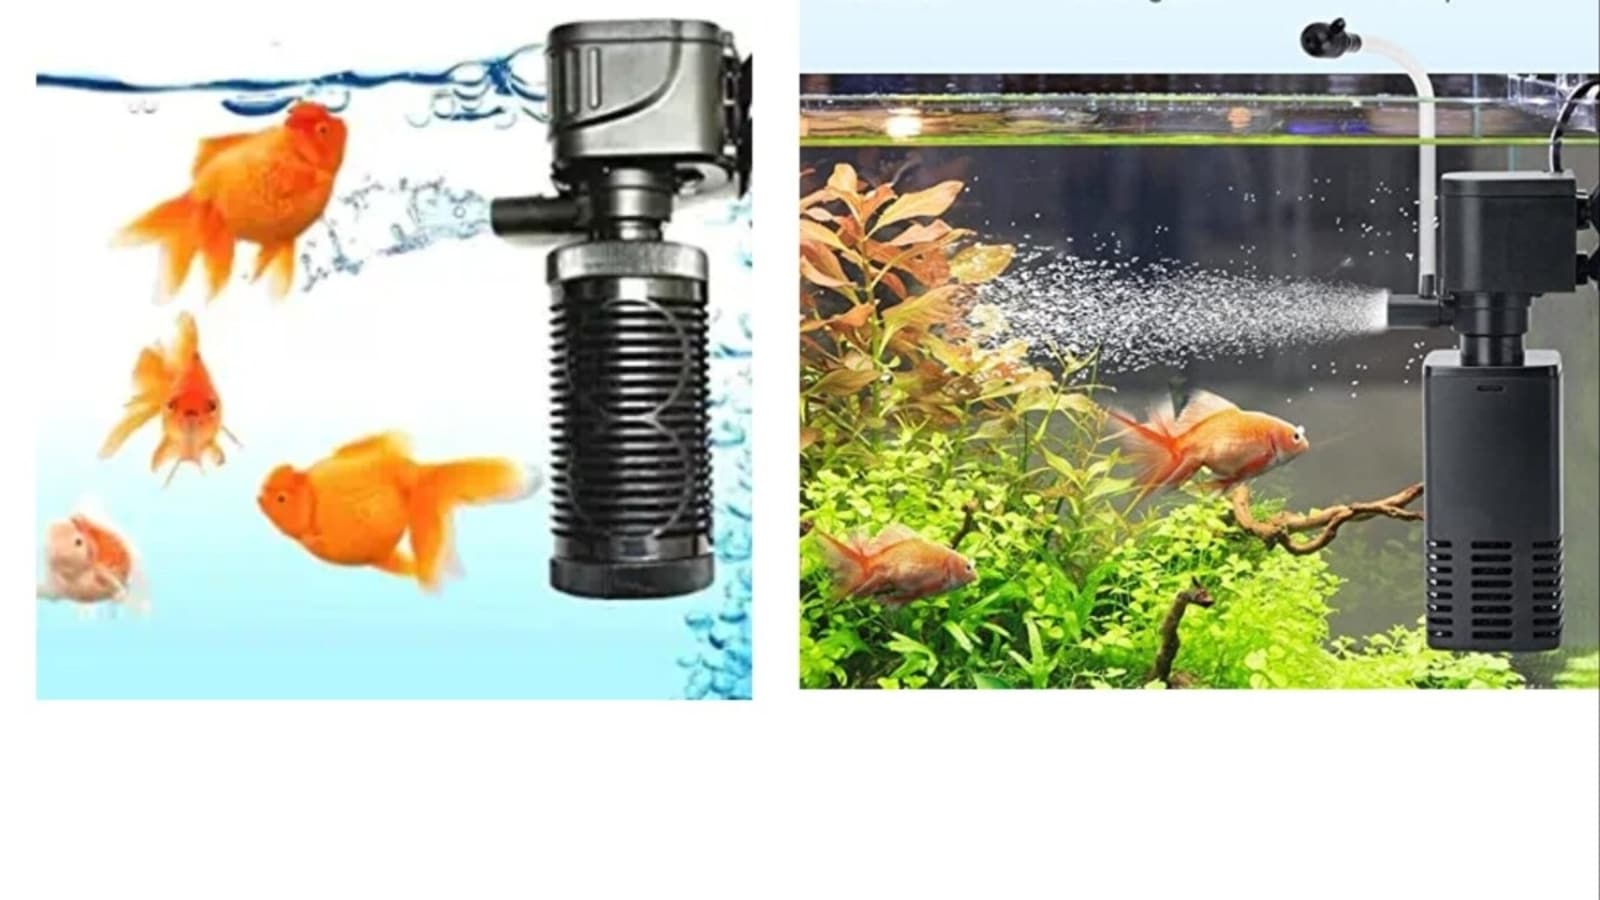 6 Ways to Fix Low Oxygen in a Fish Tank